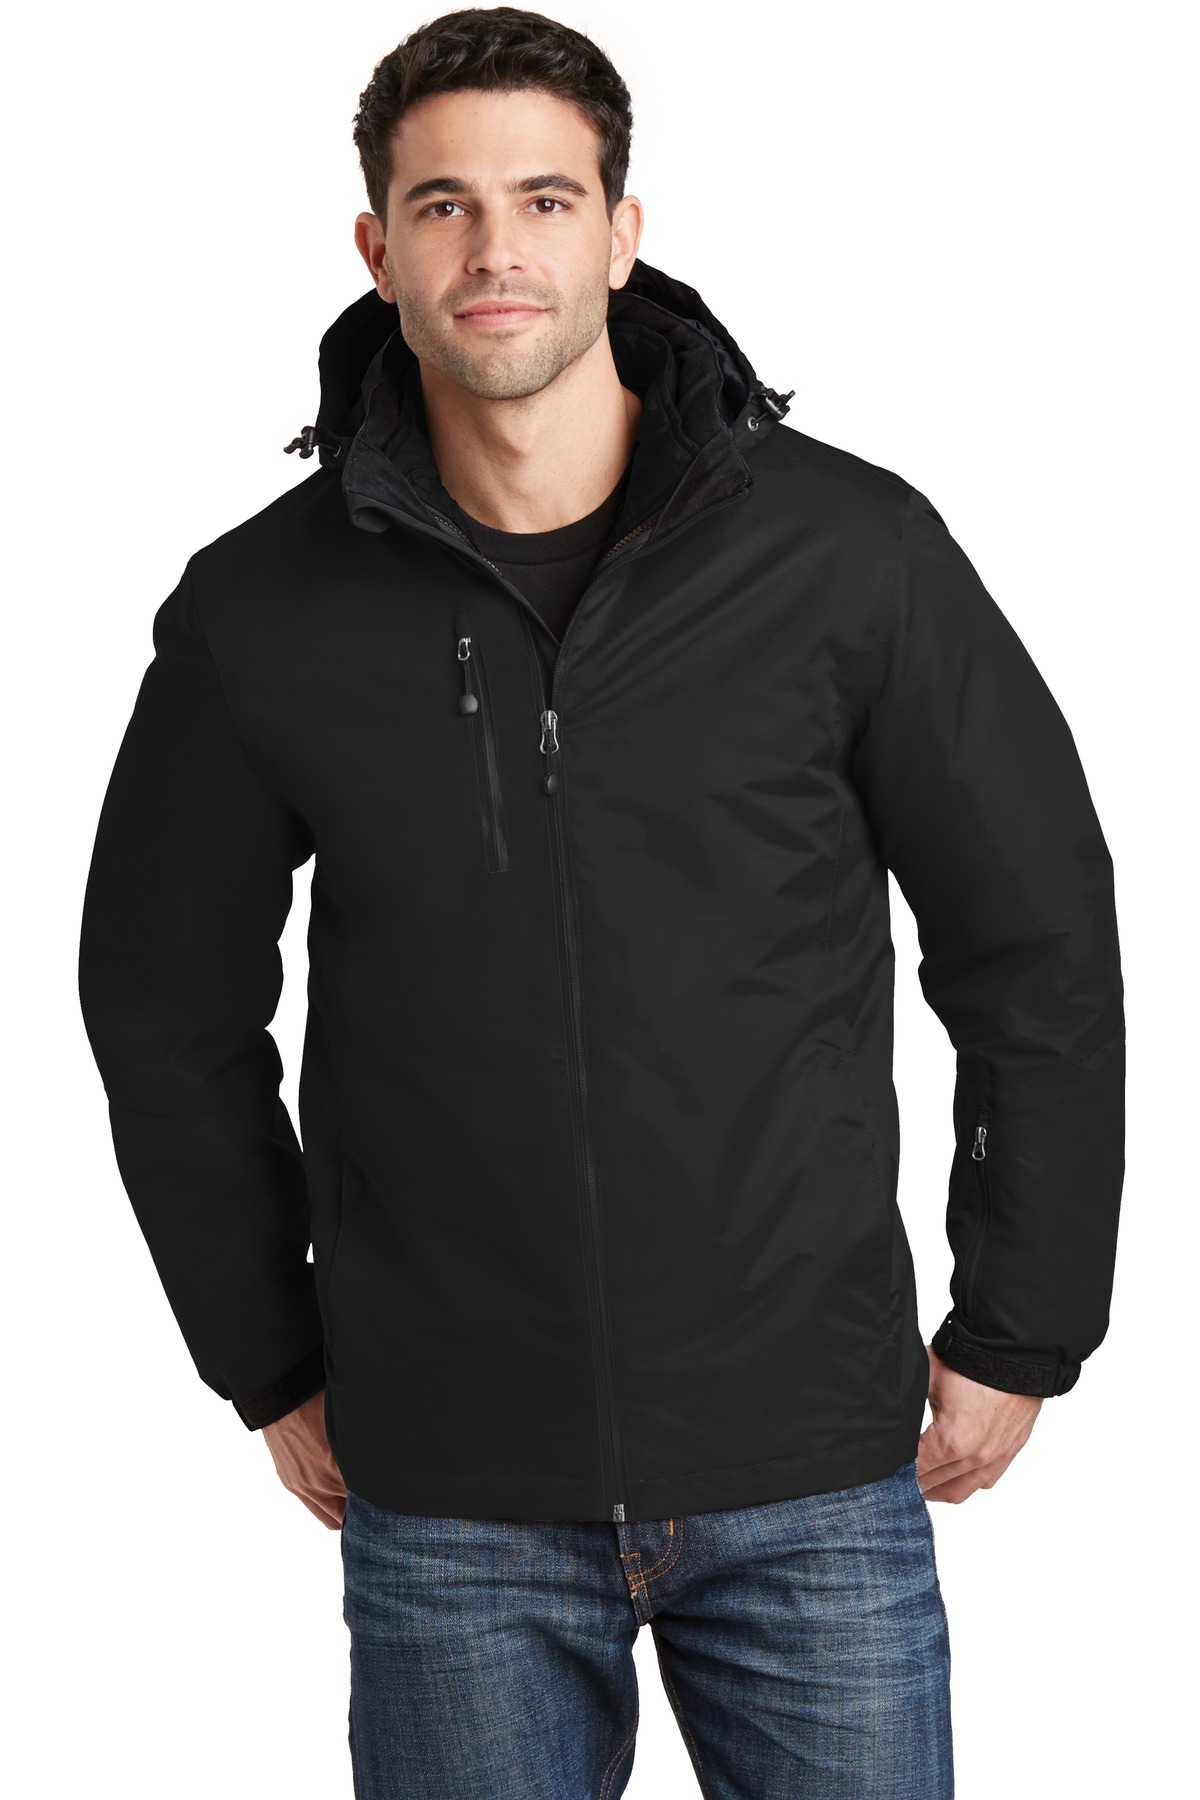 Port Authority Hospitality Outerwear ® Vortex Waterproof 3-in-1 Jacket.-Port Authority